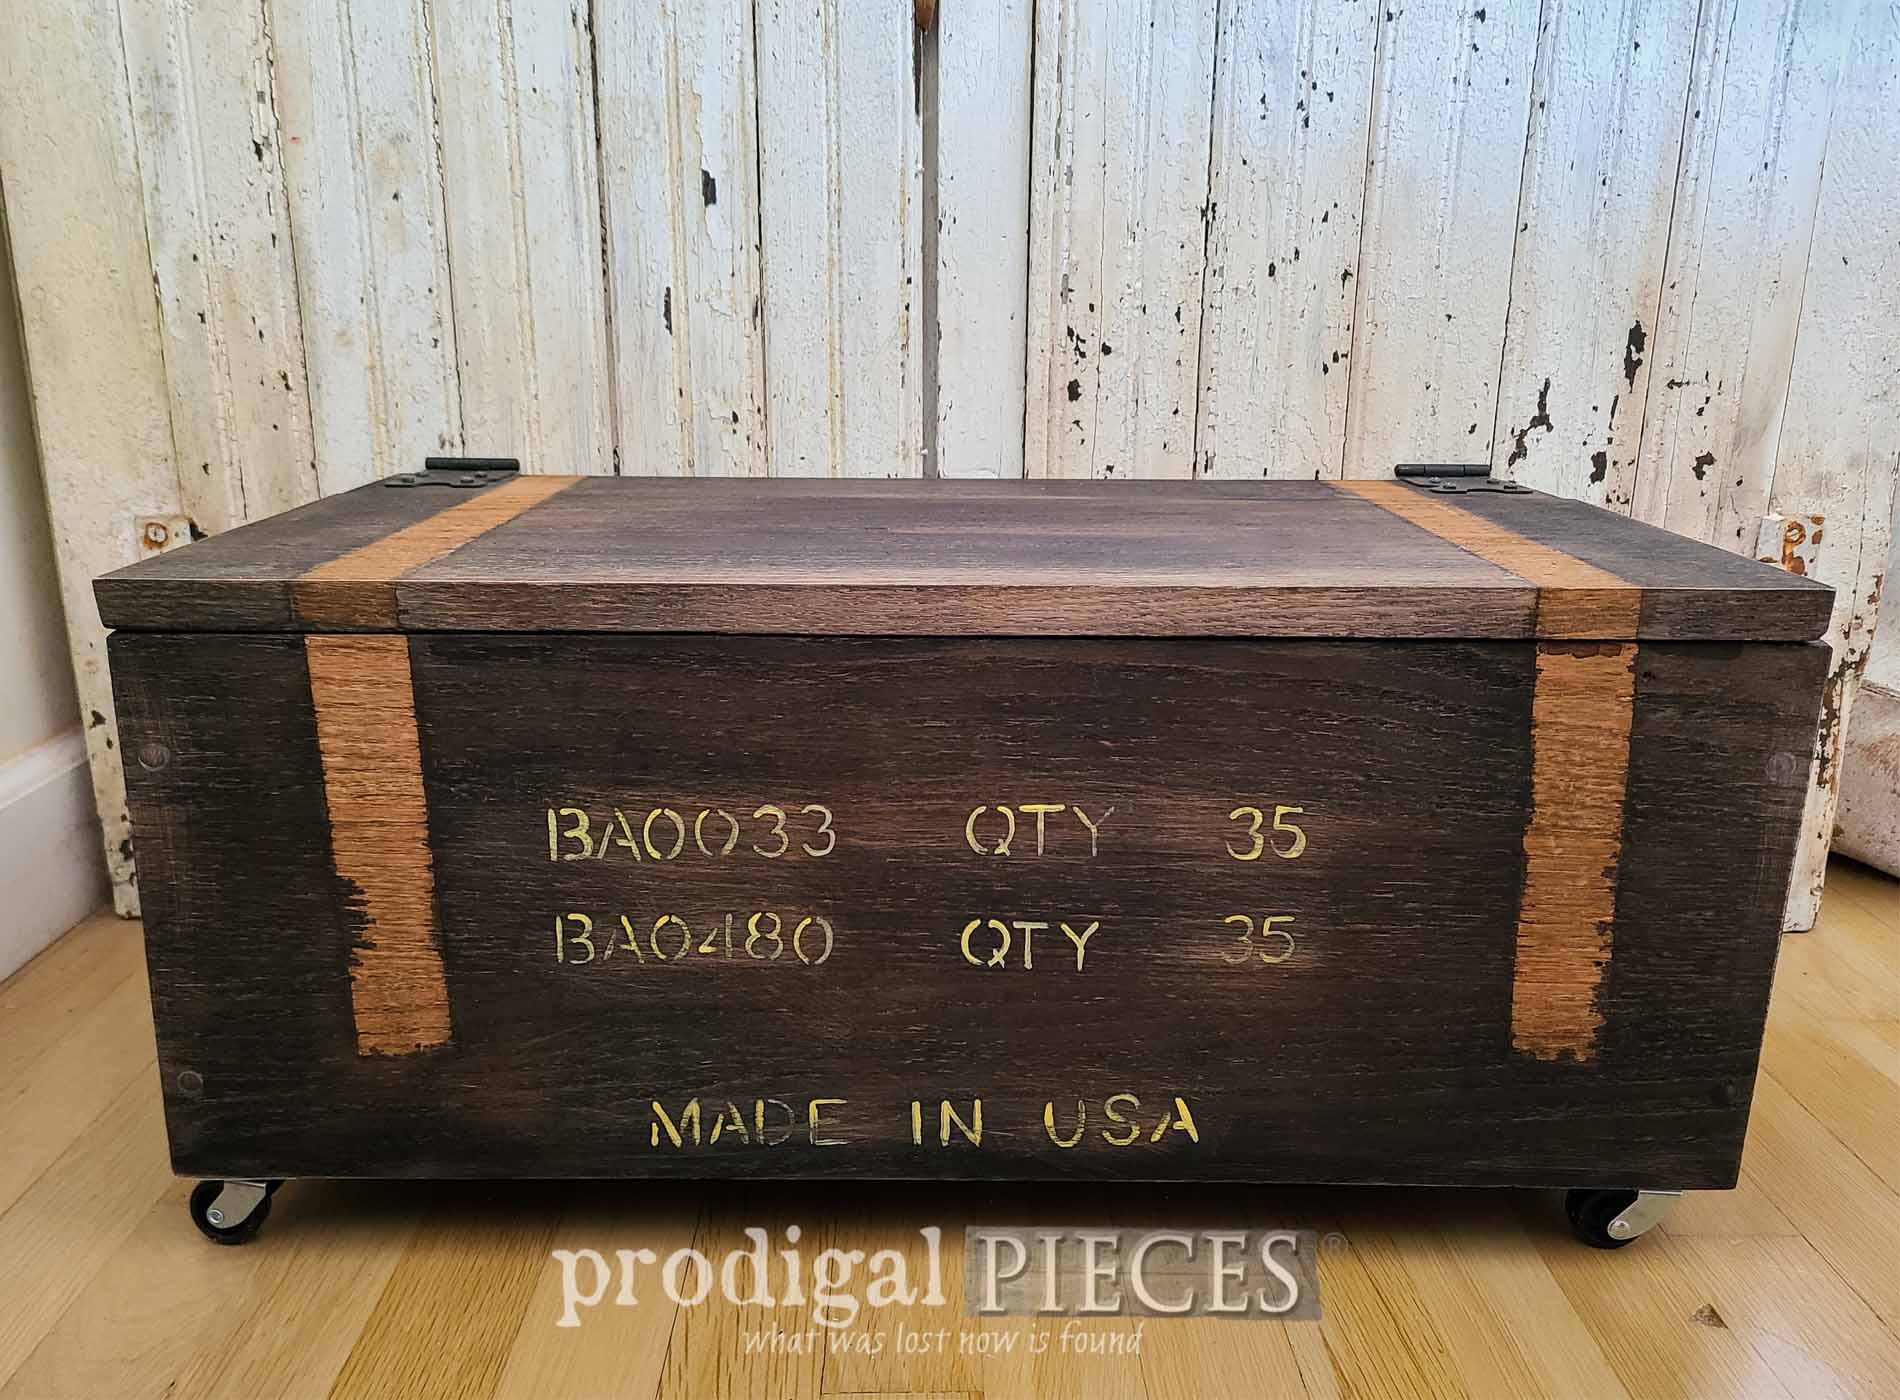 Featured Upcycled Broken Cradle Made into Industrial Ammo Box by Larissa of Prodigal Pieces | prodigalpieces.com #prodigalpieces #diy #handmade #upcycled